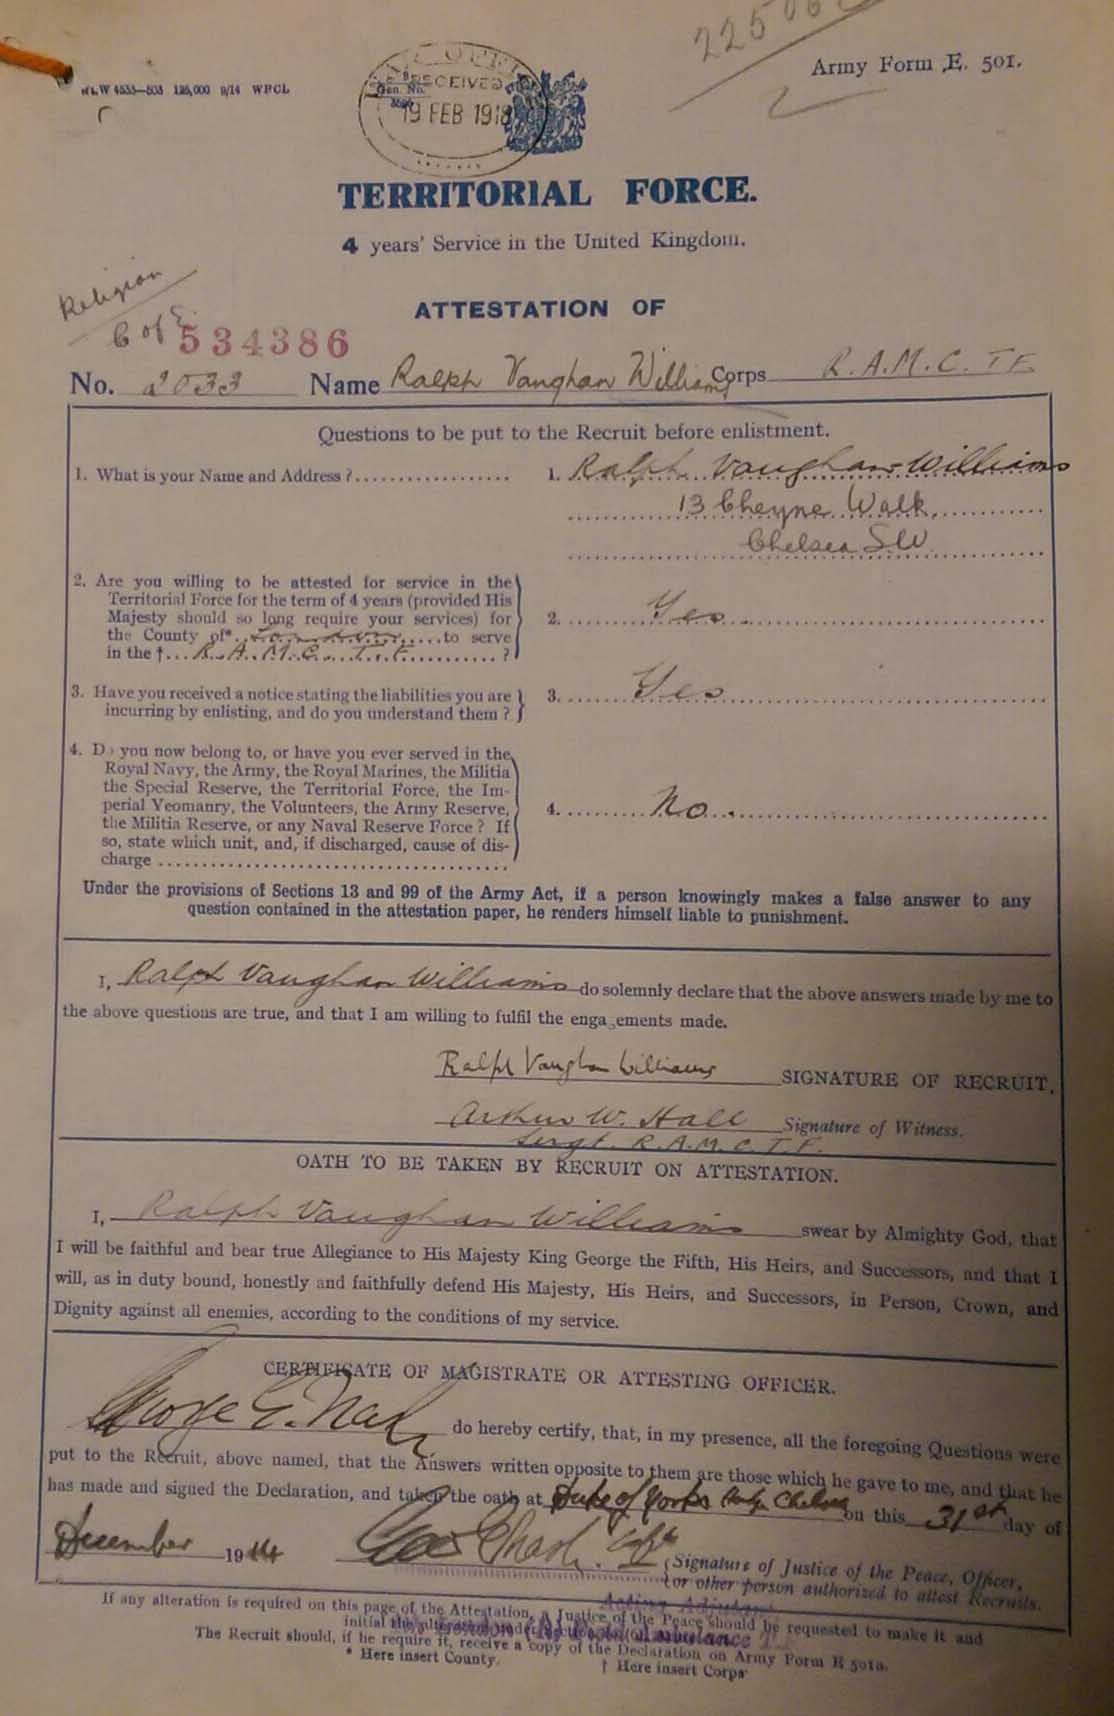 Ralph Vaughan-Williams’ original attestation as a Territorial soldier in the Royal Army Medical Corps